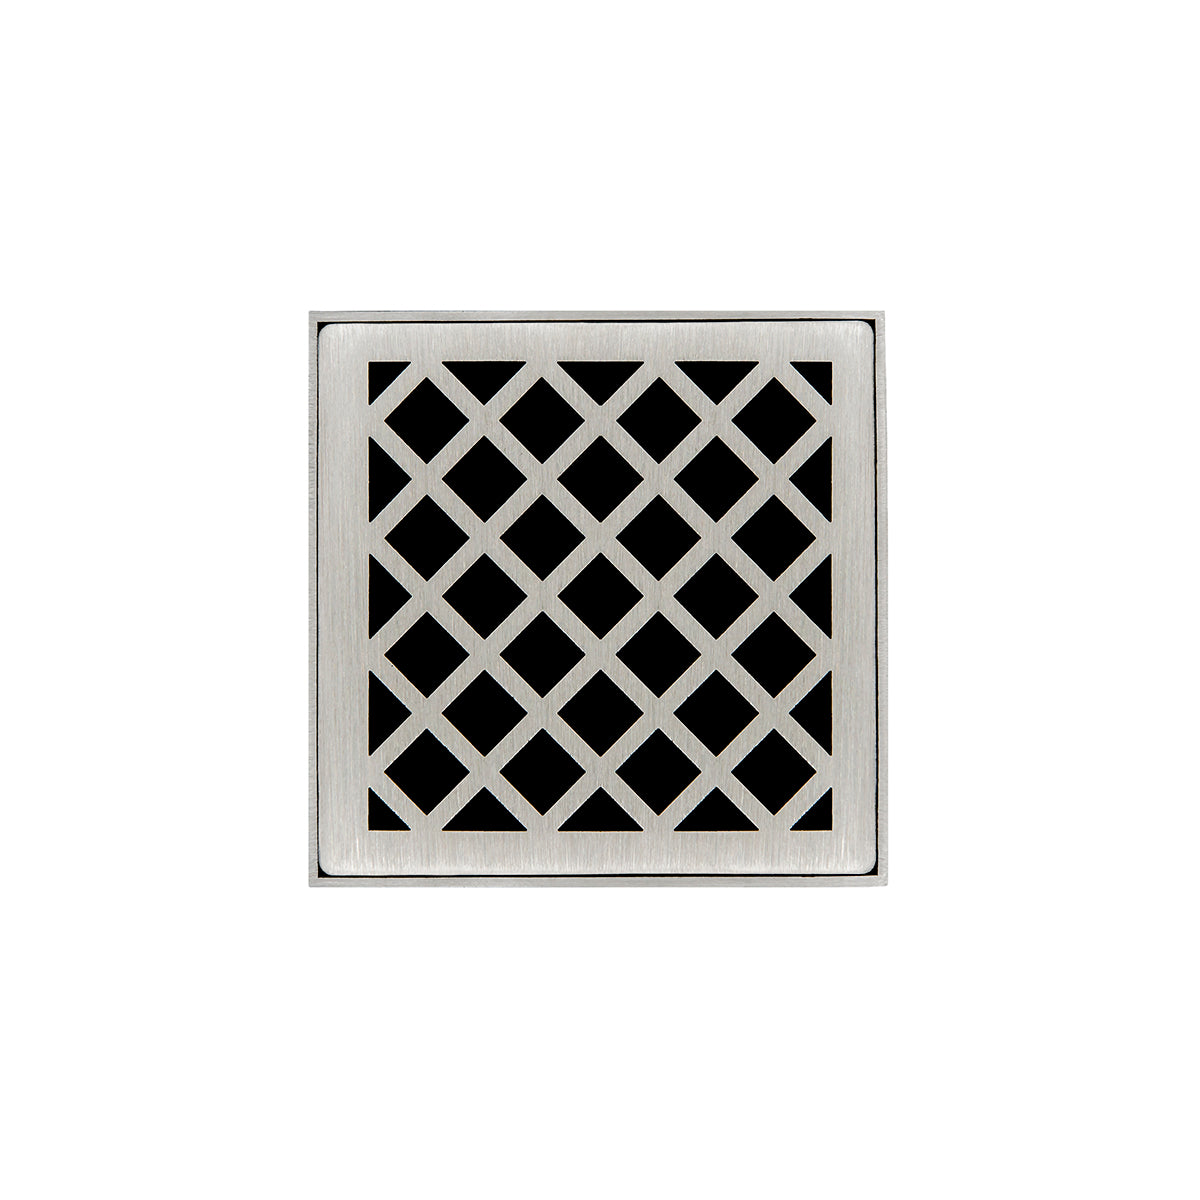 Infinity Drain 4" x 4" XD 4 Premium Center Drain Kit with Criss-Cross Pattern Decorative Plate with Cast Iron Drain Body for Hot Mop, 2" Outlet